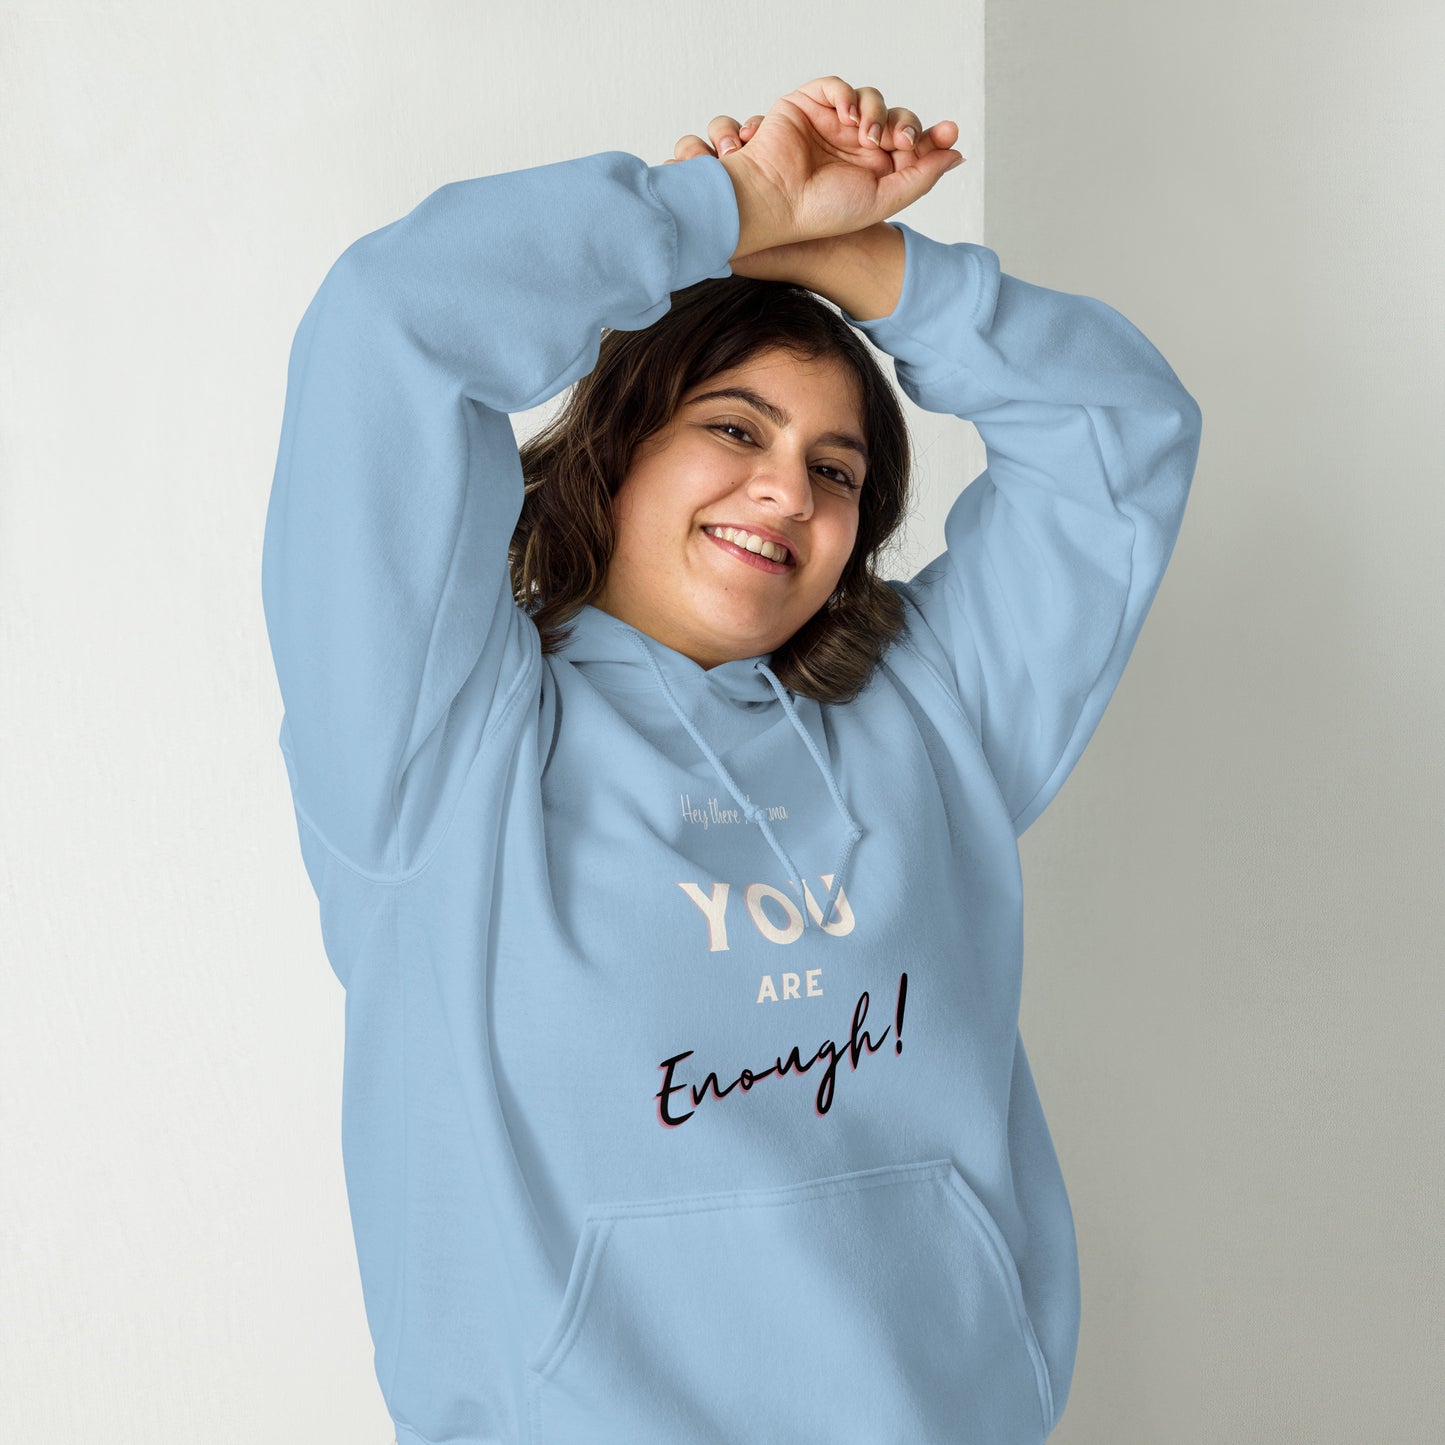 You are Enough! Hoodie